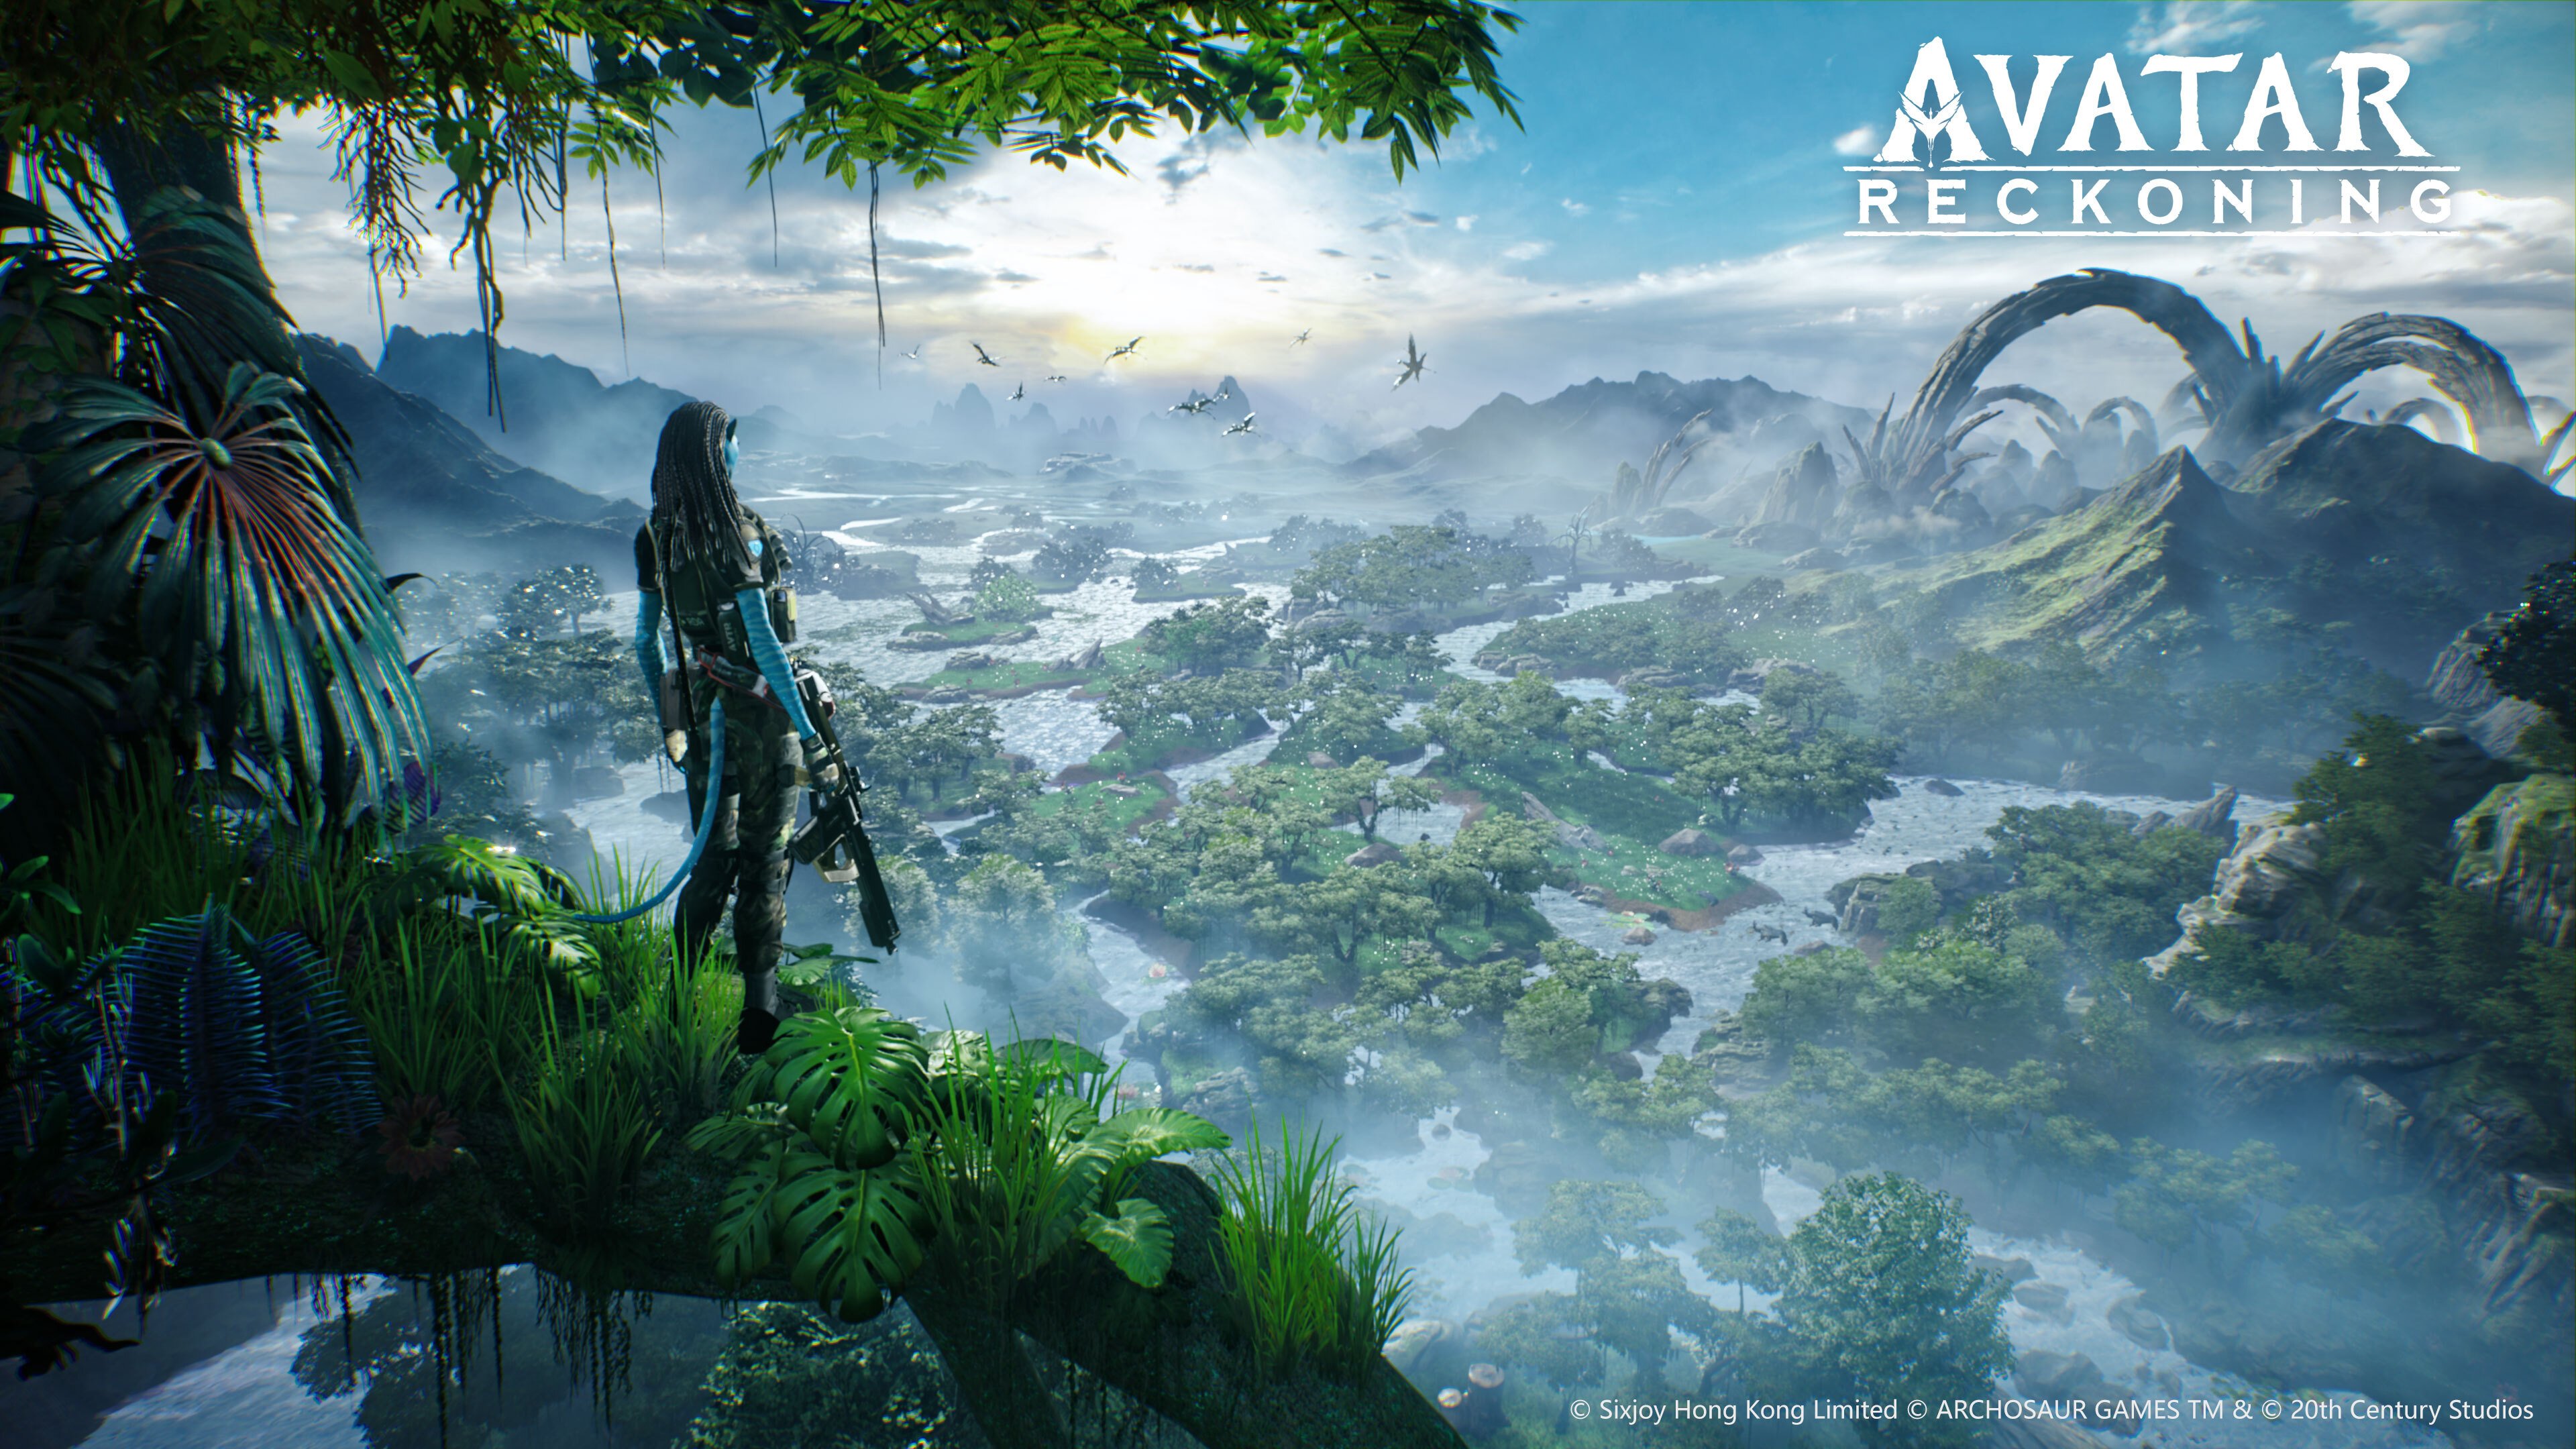 Mobile MMORPG Shooter ‘Avatar: Reckoning’ Announced for iOS and Android, Coming This Year